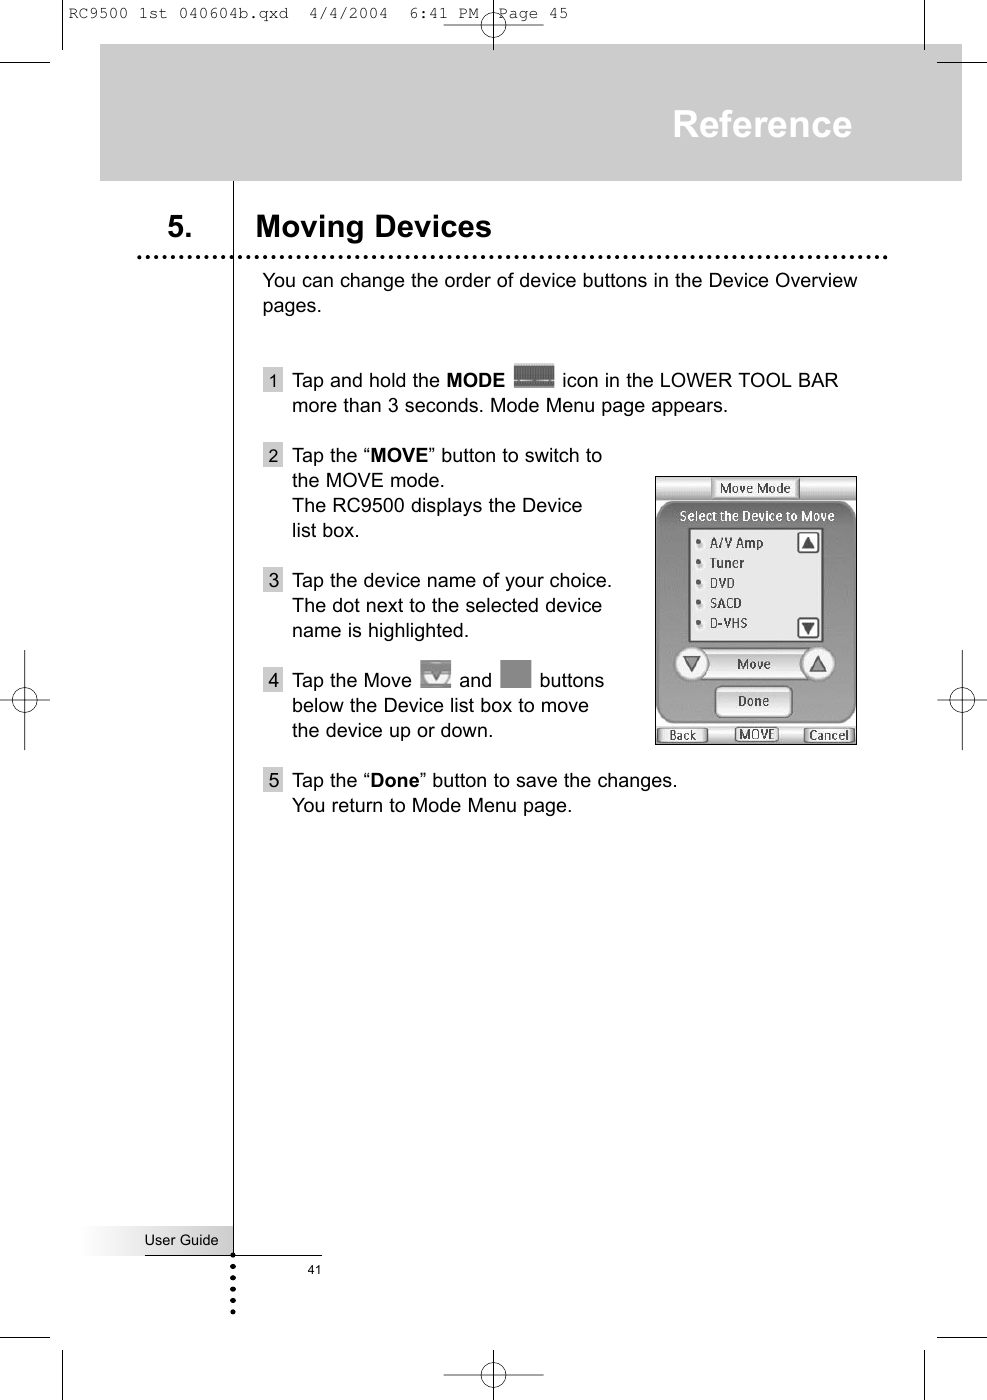 You can change the order of device buttons in the Device Overviewpages. 1Tap and hold the MODE icon in the LOWER TOOL BARmore than 3 seconds. Mode Menu page appears.2Tap the “MOVE” button to switch to the MOVE mode. The RC9500 displays the Device list box.3 Tap the device name of your choice.The dot next to the selected devicename is highlighted.4 Tap the Move  and  buttons below the Device list box to move the device up or down.5 Tap the “Done” button to save the changes.You return to Mode Menu page.User Guide41Reference5. Moving DevicesRC9500 1st 040604b.qxd  4/4/2004  6:41 PM  Page 45